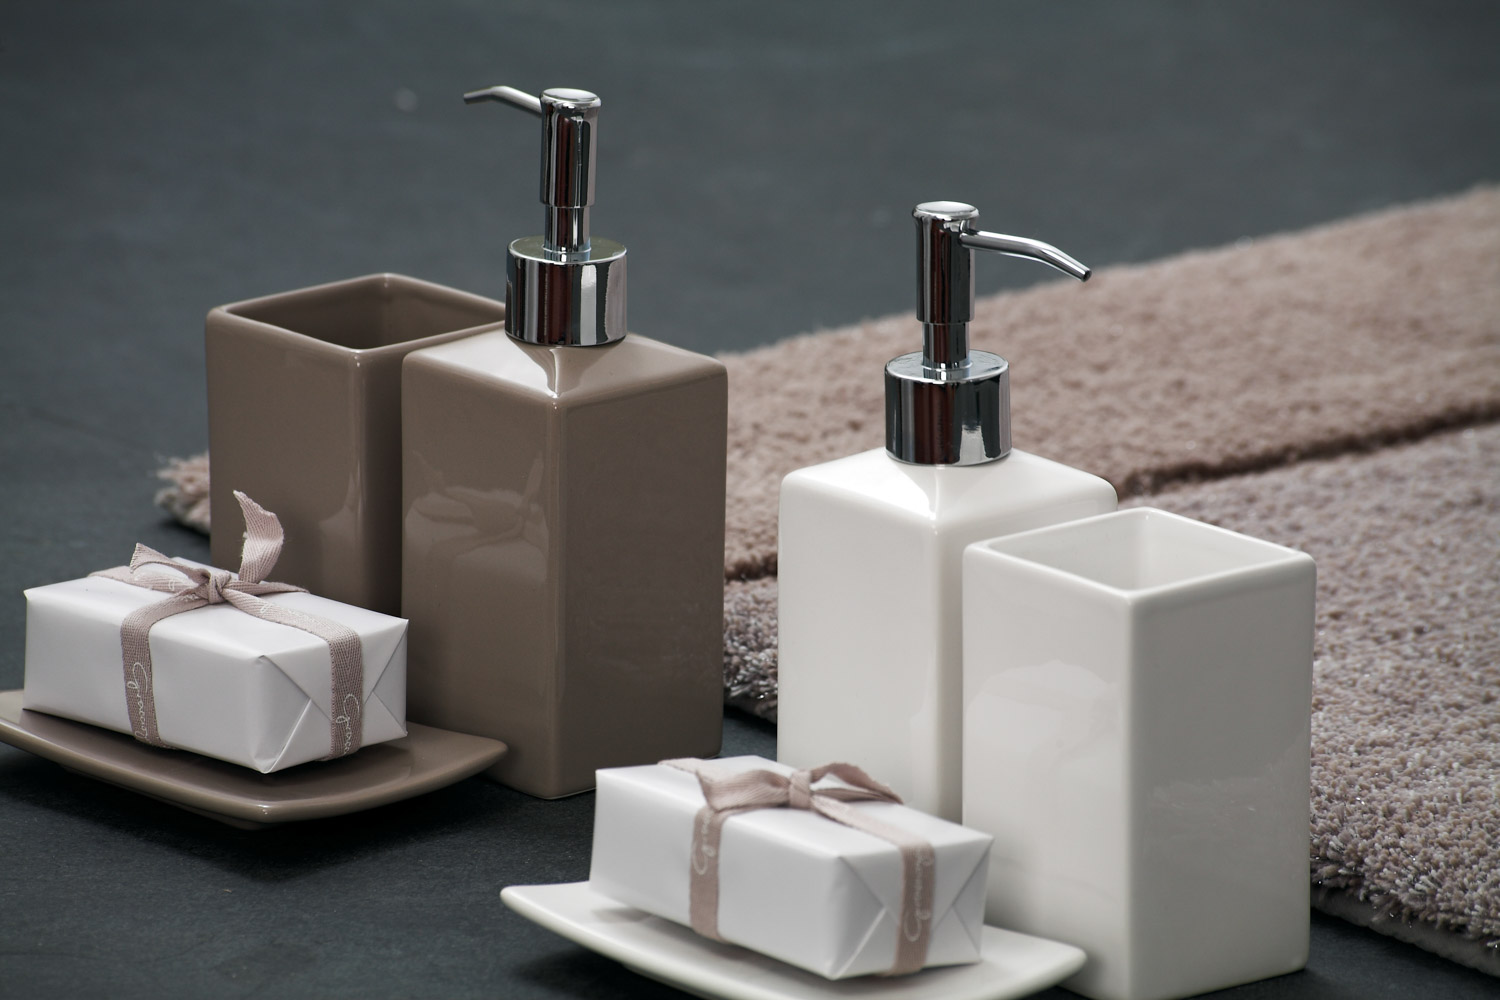 BATH ACCESSORIES category